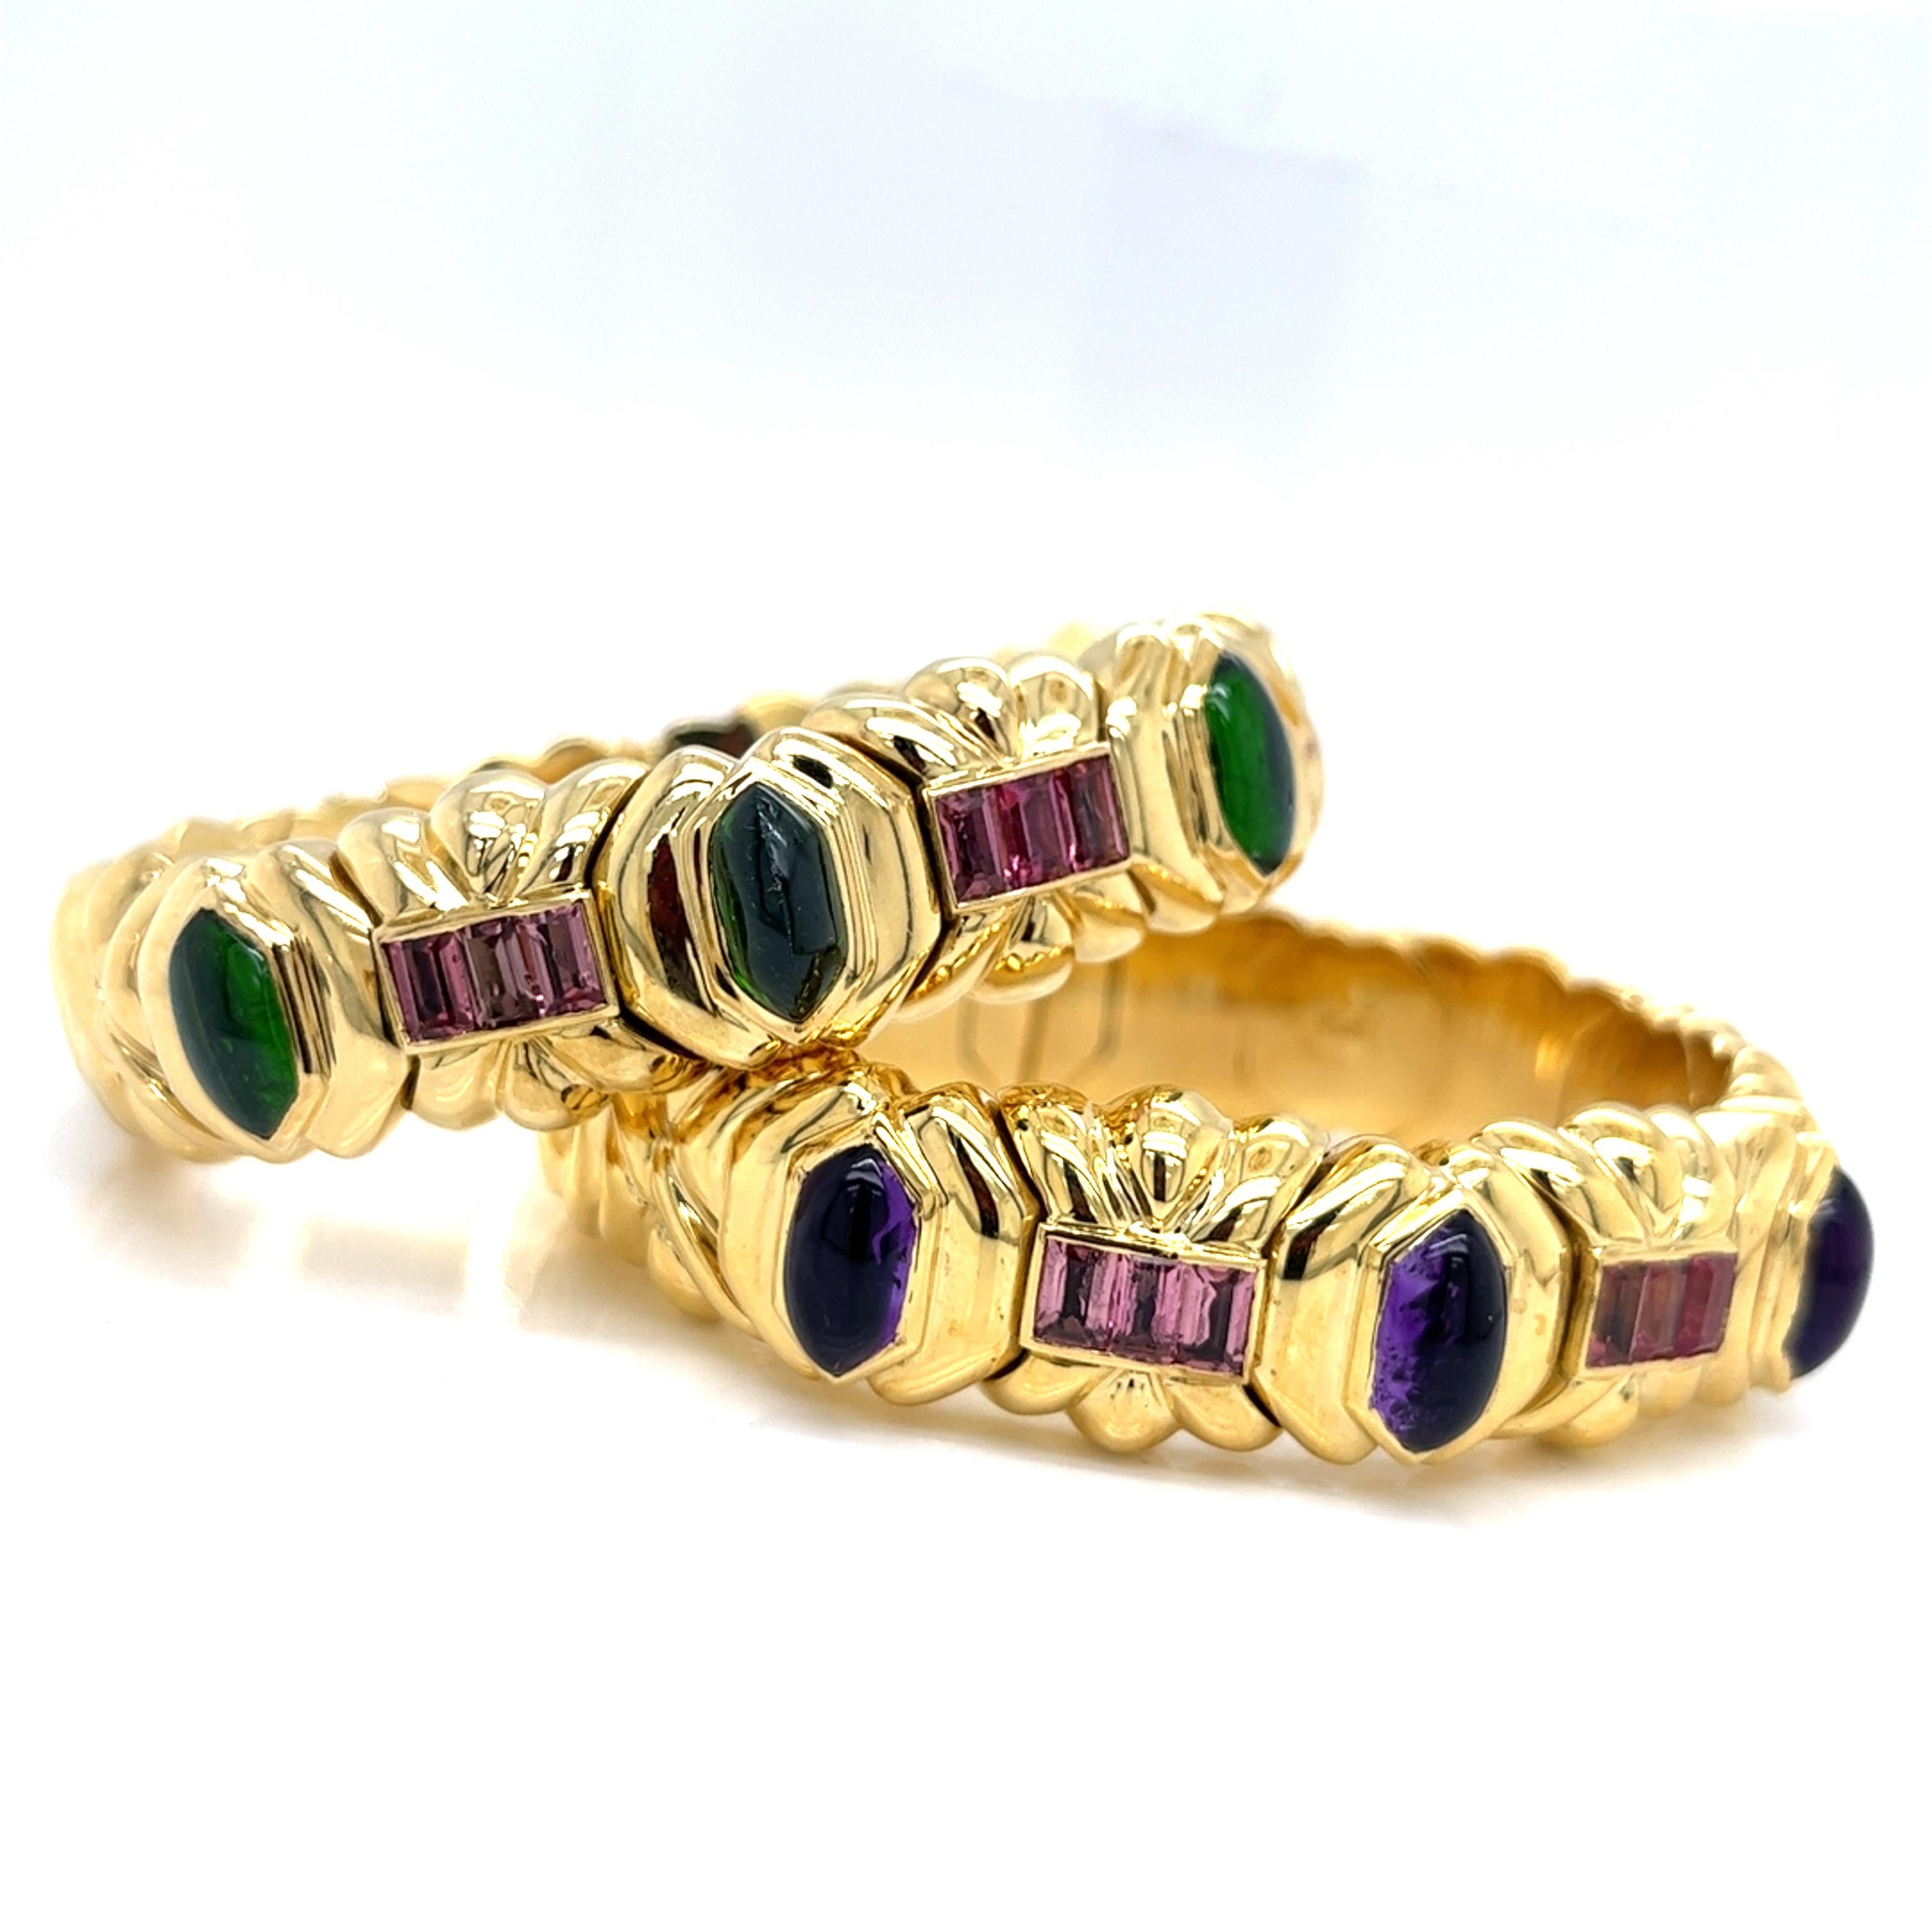 18Kt Yellow Gold Bracelet with Amethyst and Tourmaline. Total Weights 72 grams In Excellent Condition For Sale In Miami, FL